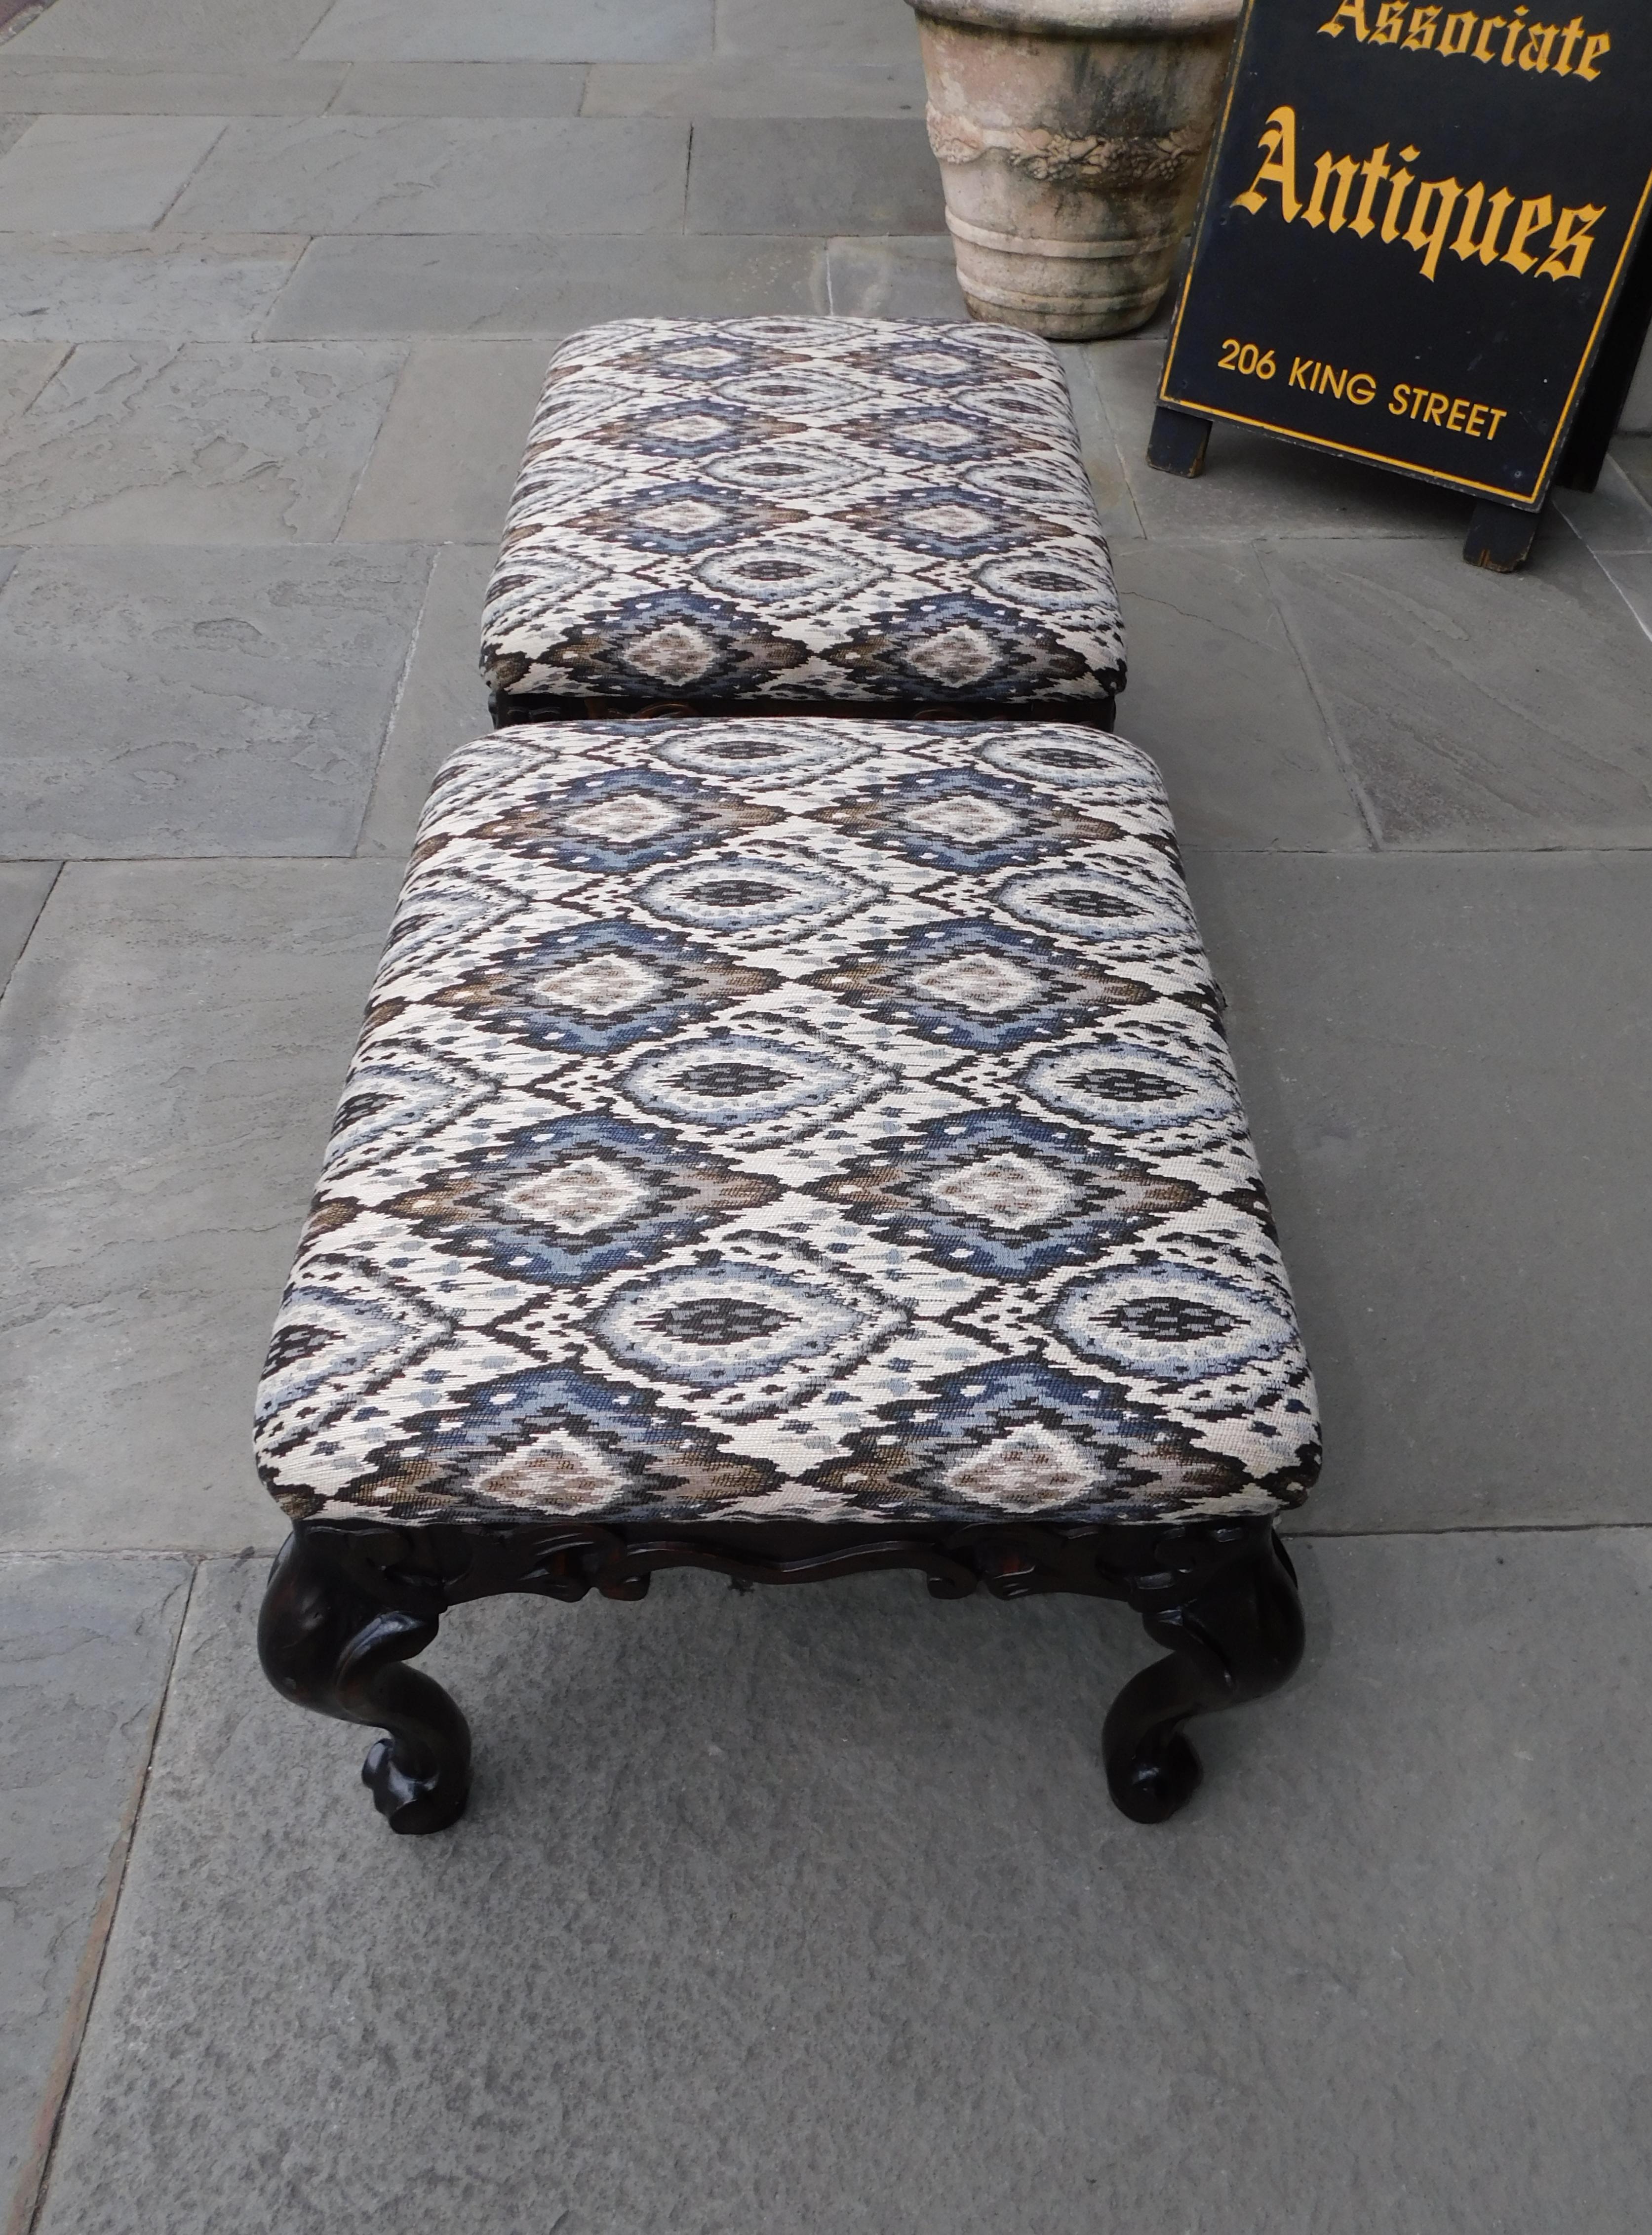 Upholstery Pair of Italian Baroque Style Upholstered Benches with Cabriole Legs C. 1880 For Sale